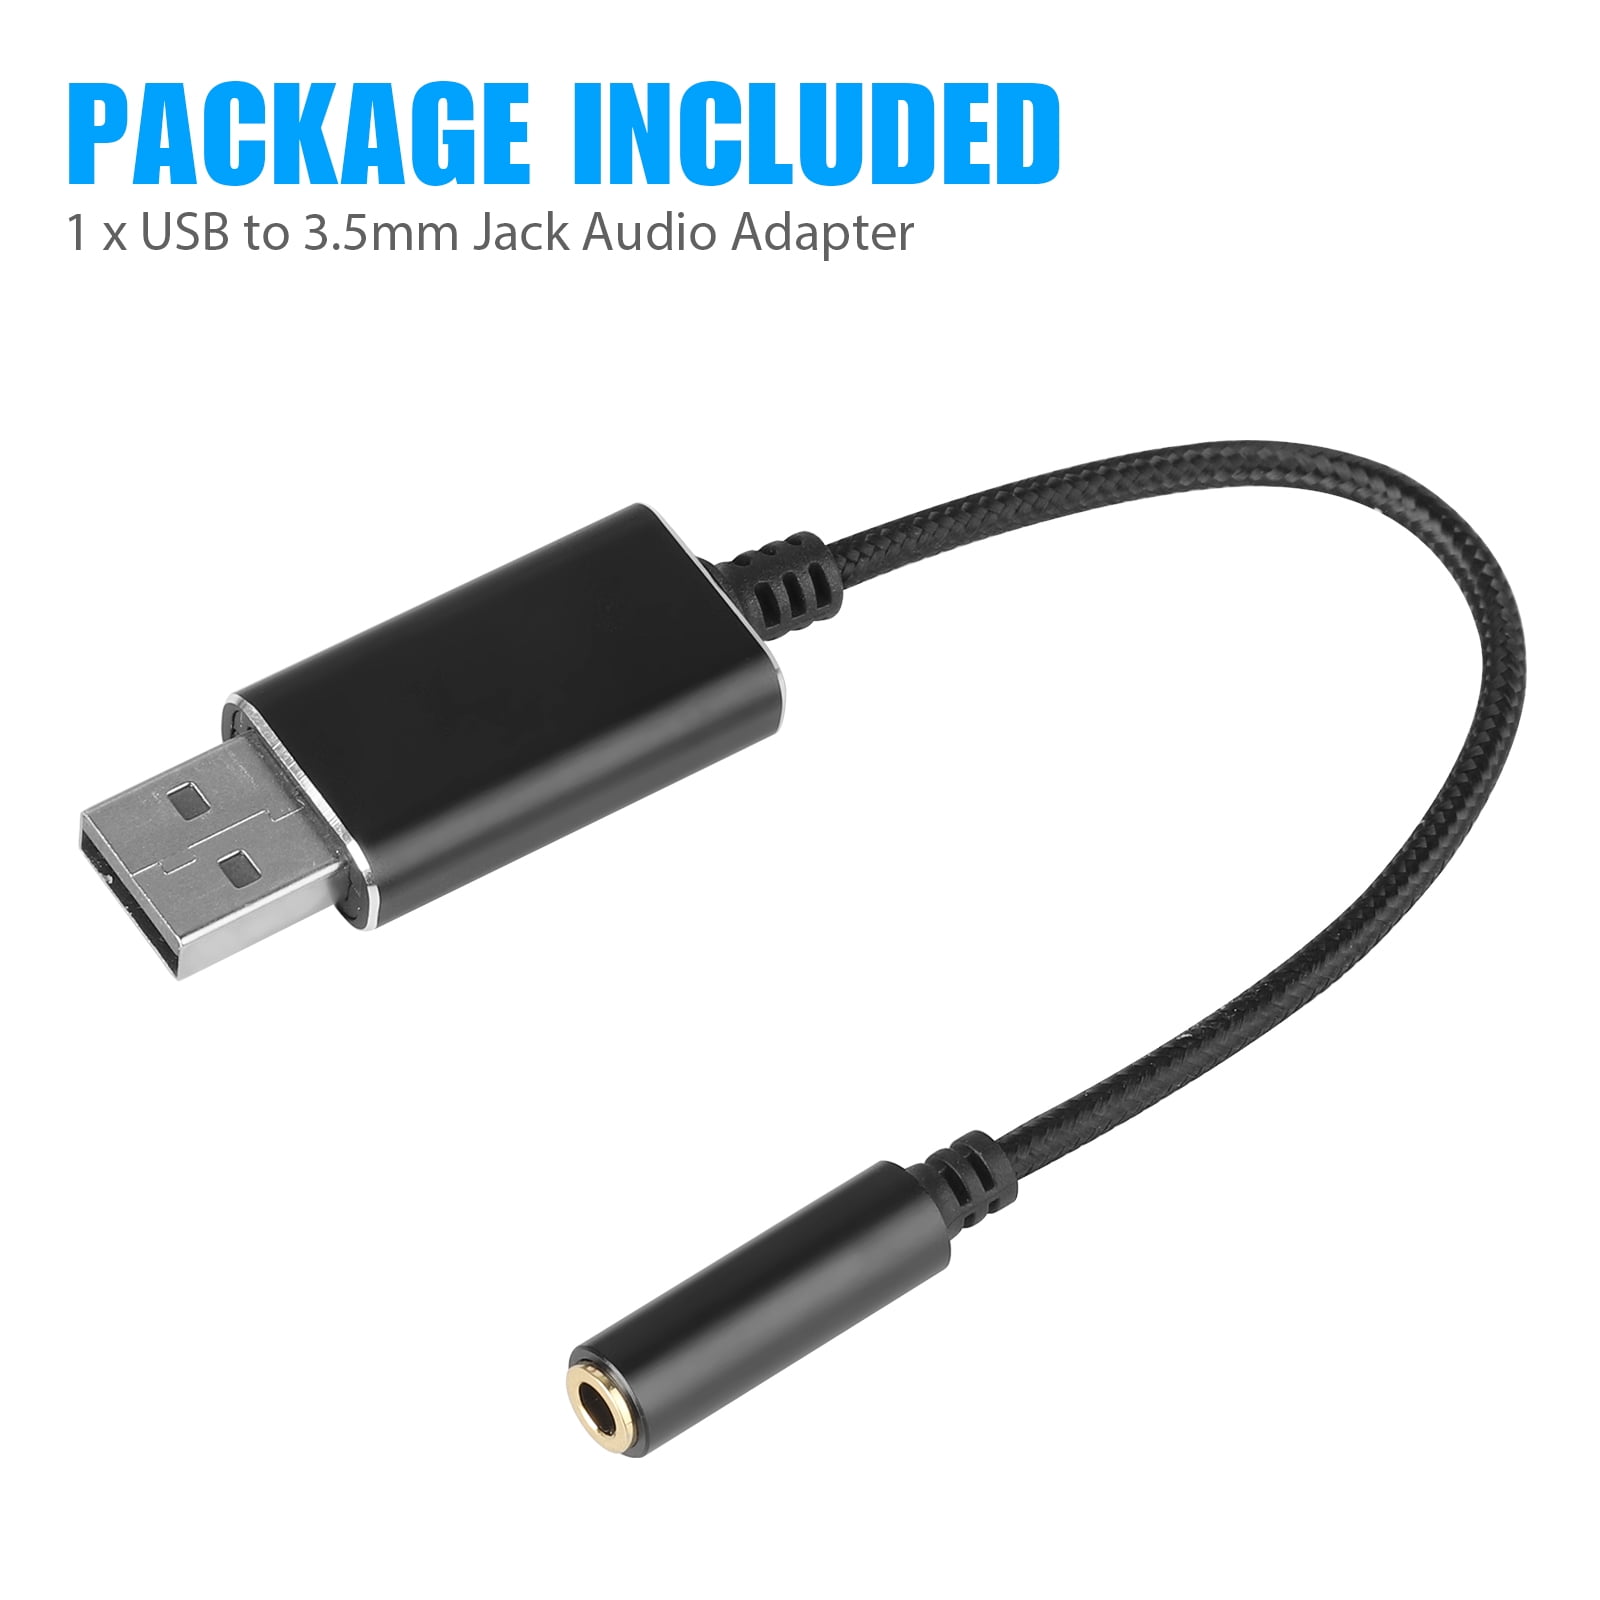 USB to 3.5mm Jack Audio Adapter, EEEkit USB to AUX Cable with TRRS 4-Pole Mic-Supported USB to Headphone AUX Adapter Built-in Chip External Sound Card for PS4 PC and More (7.8 inches)